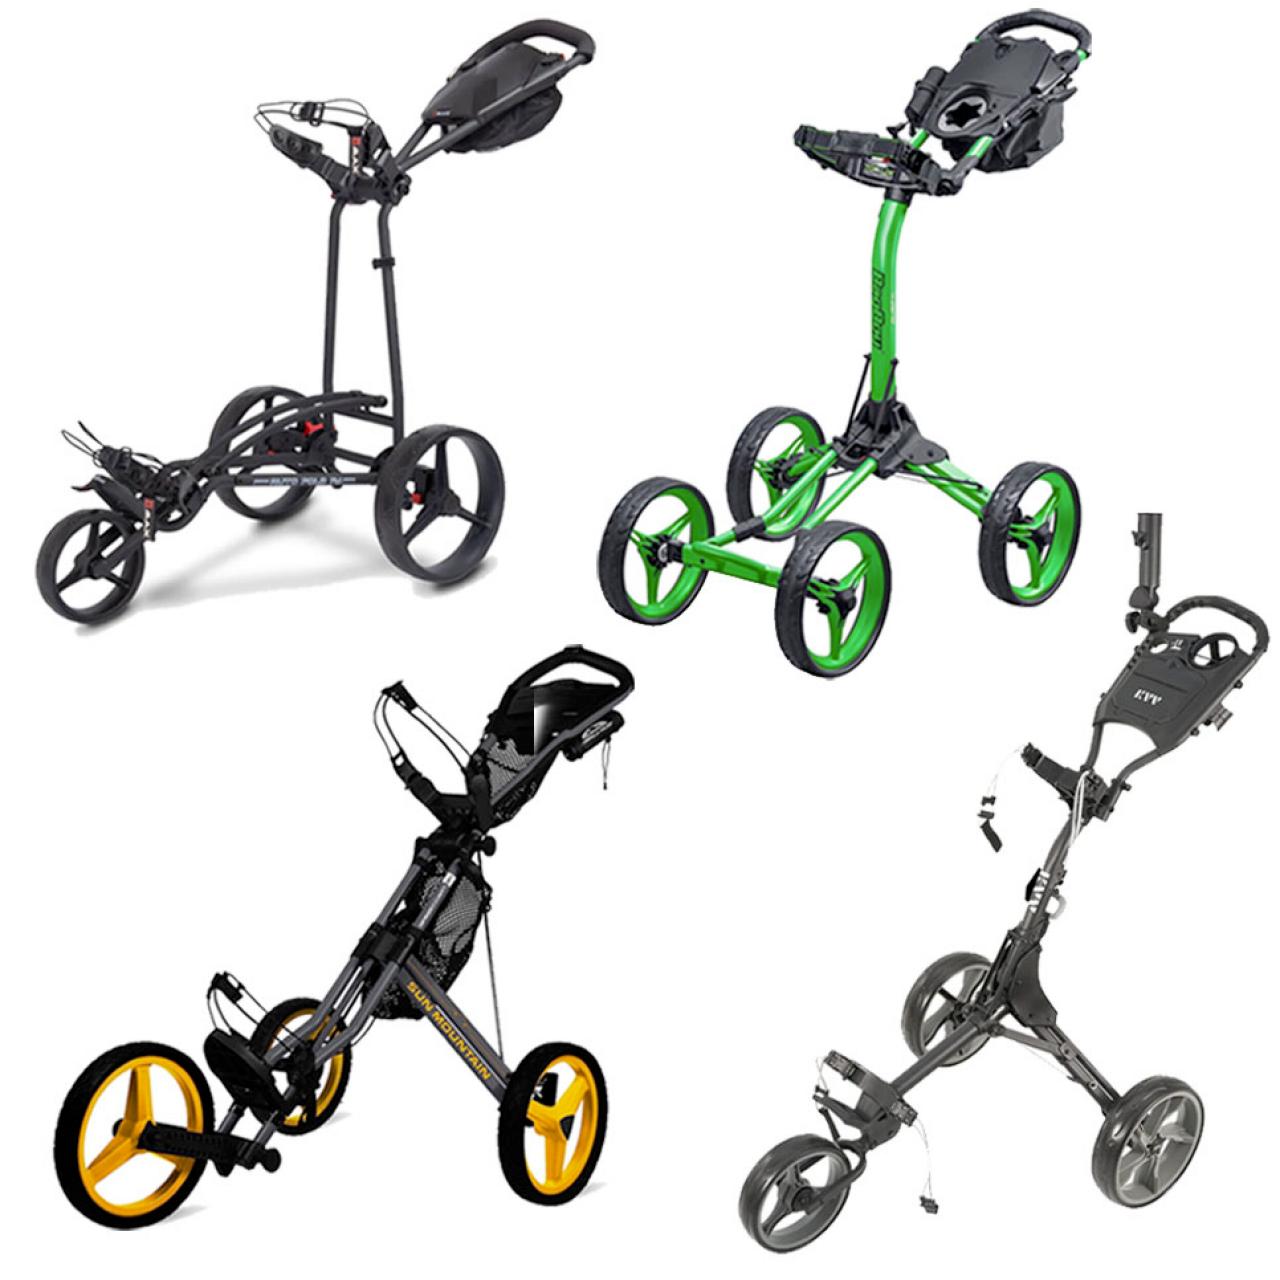 Prime Day Golf Deals: The most affordable pushcarts on sale right now | Golf  Equipment: Clubs, Balls, Bags | Golf Digest